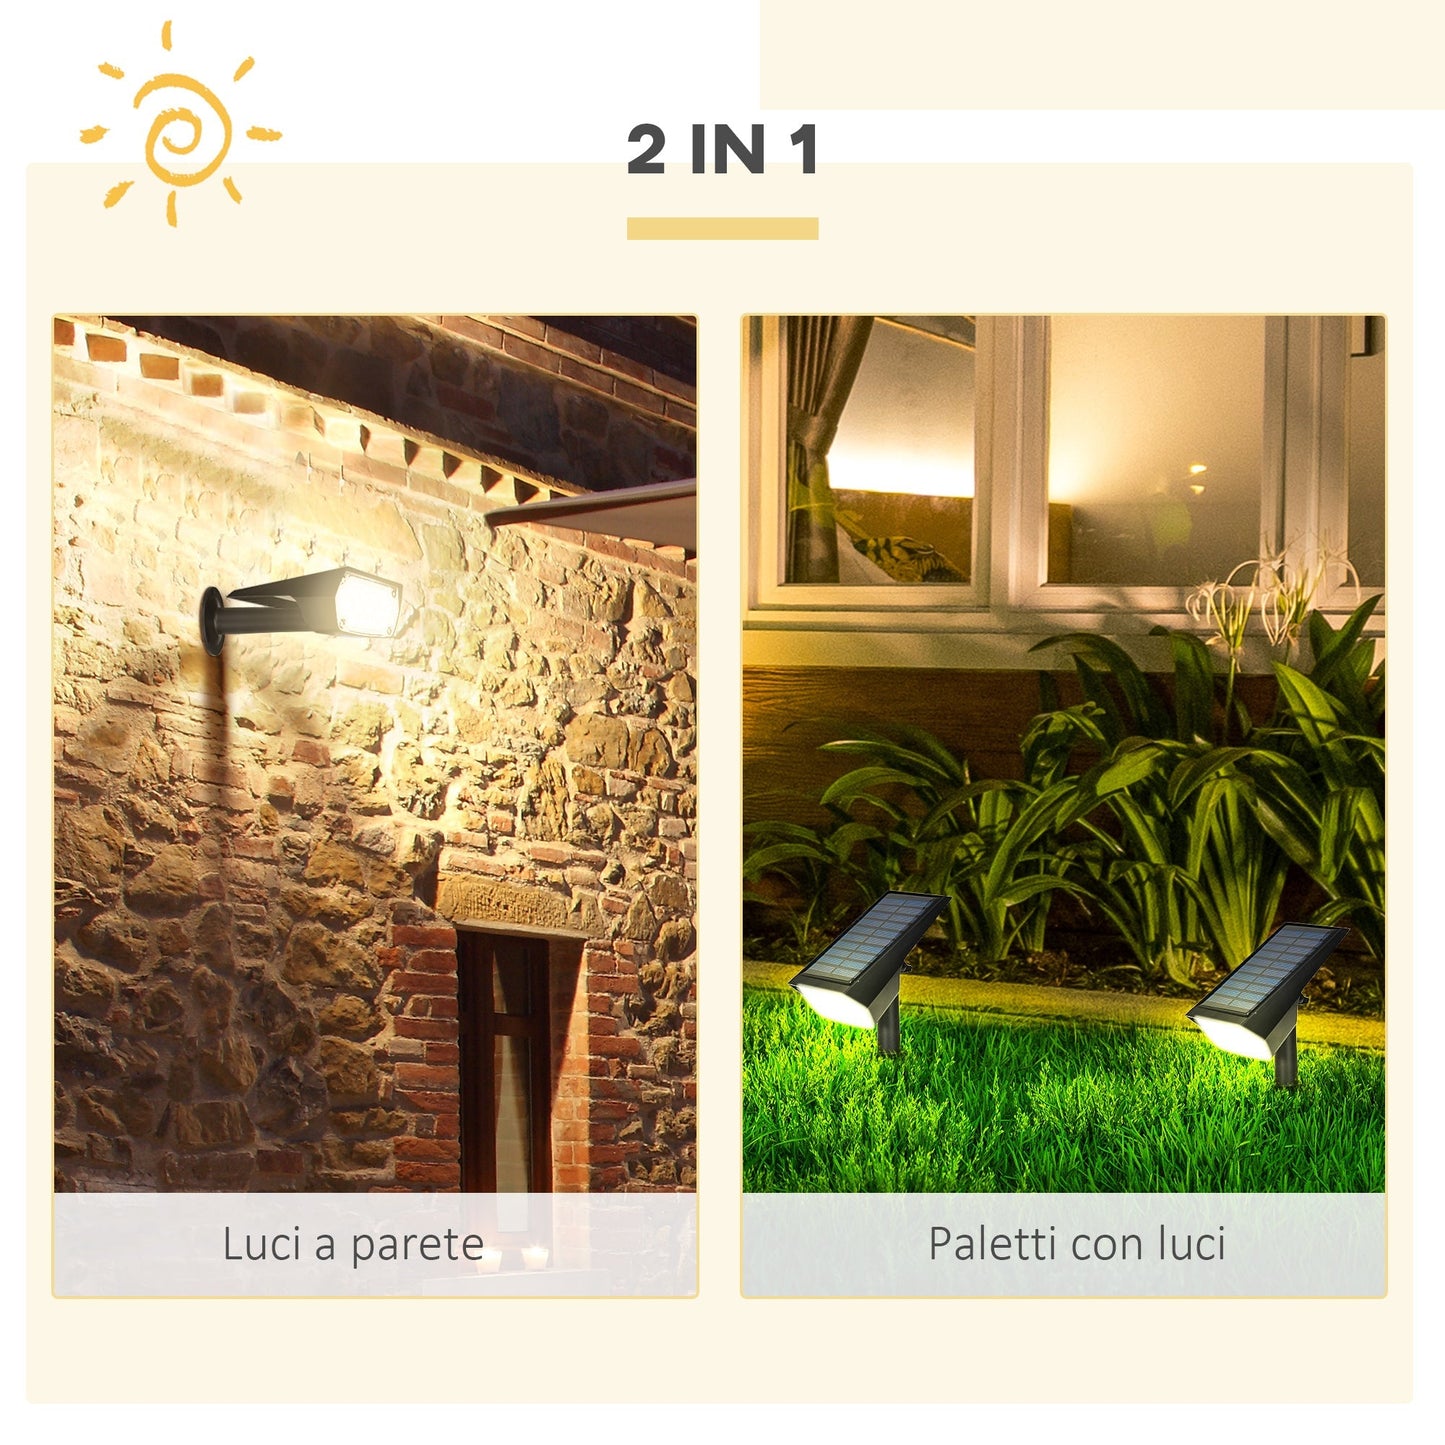 Outsunny set of 4 garden spotlights and wall with picket, sunlight 2 brightness, 17x10x48.3cm black